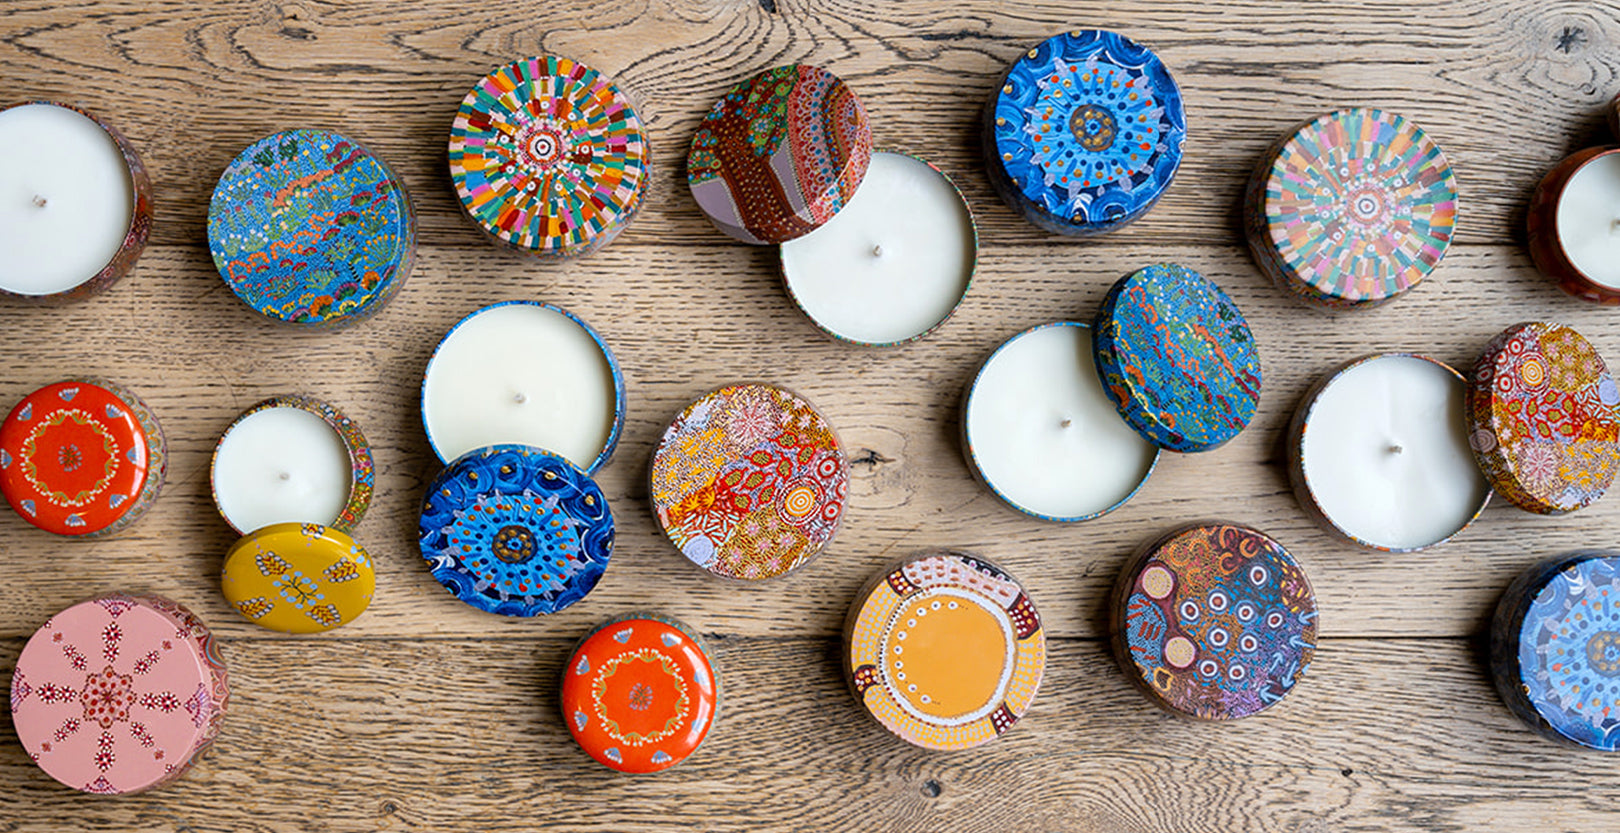 Aromatherapy in a beautiful Tin! Why Our Candles Make for the Best Gifts